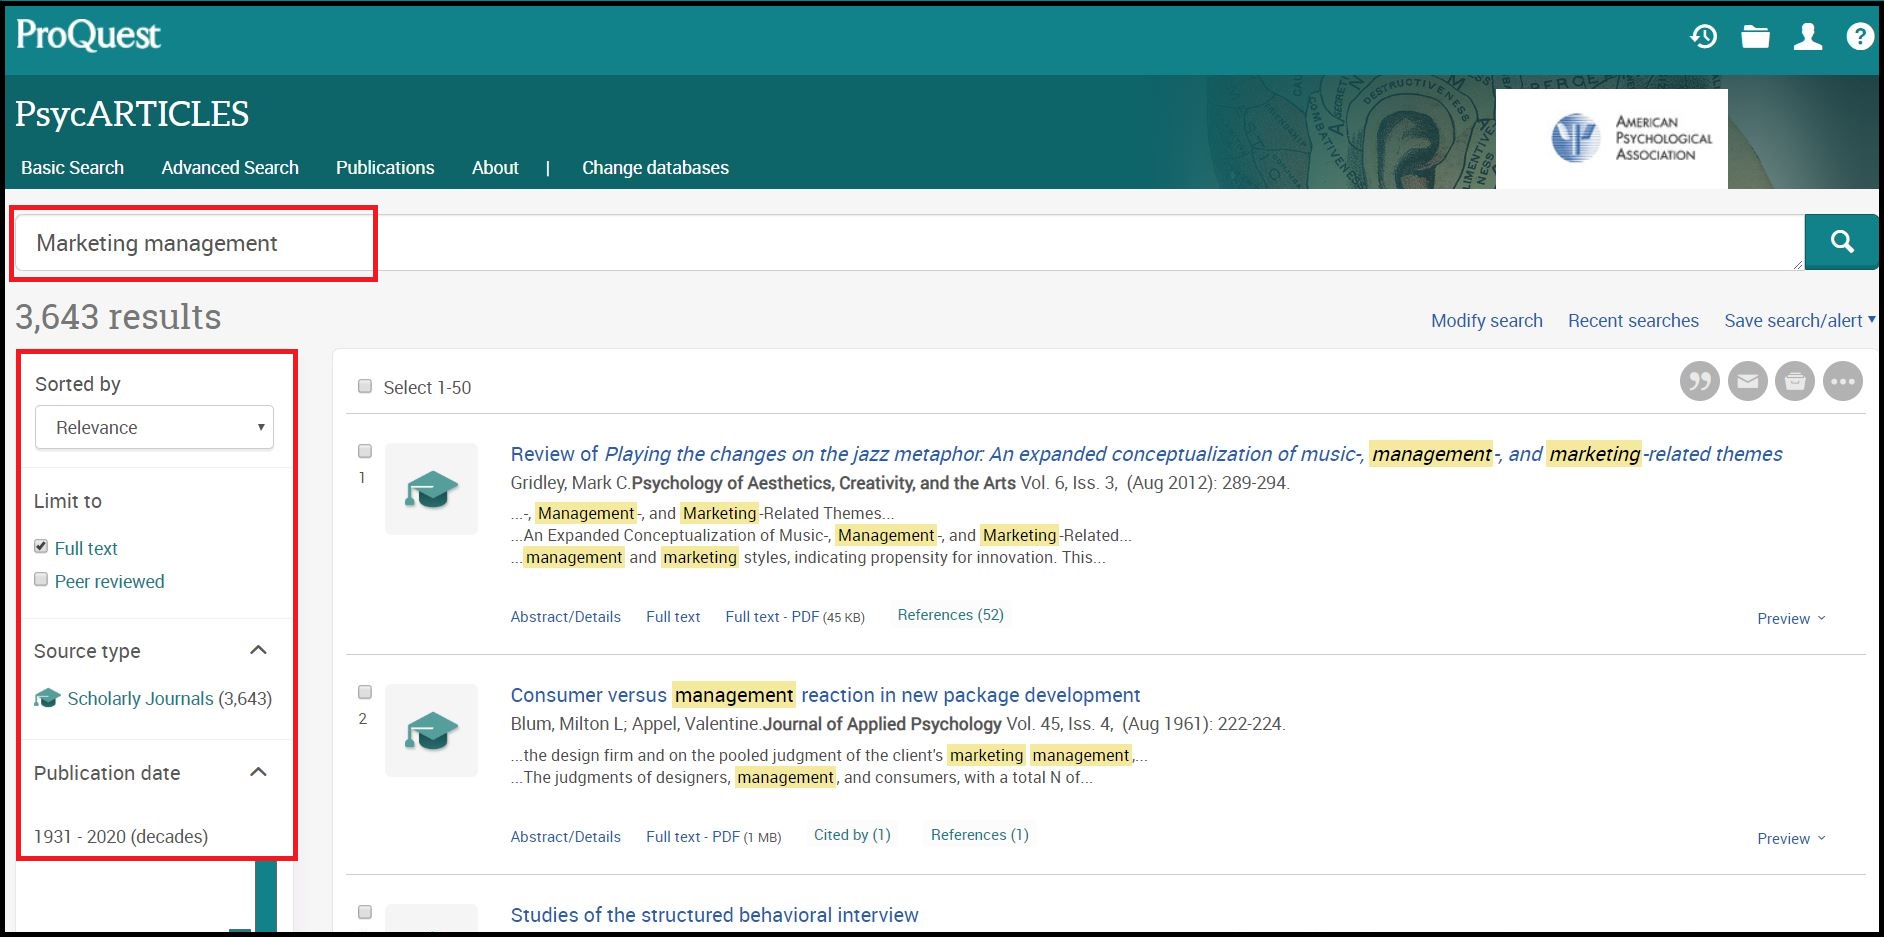 Open ProQuest PsycARTICLES then Search for Required Subject 